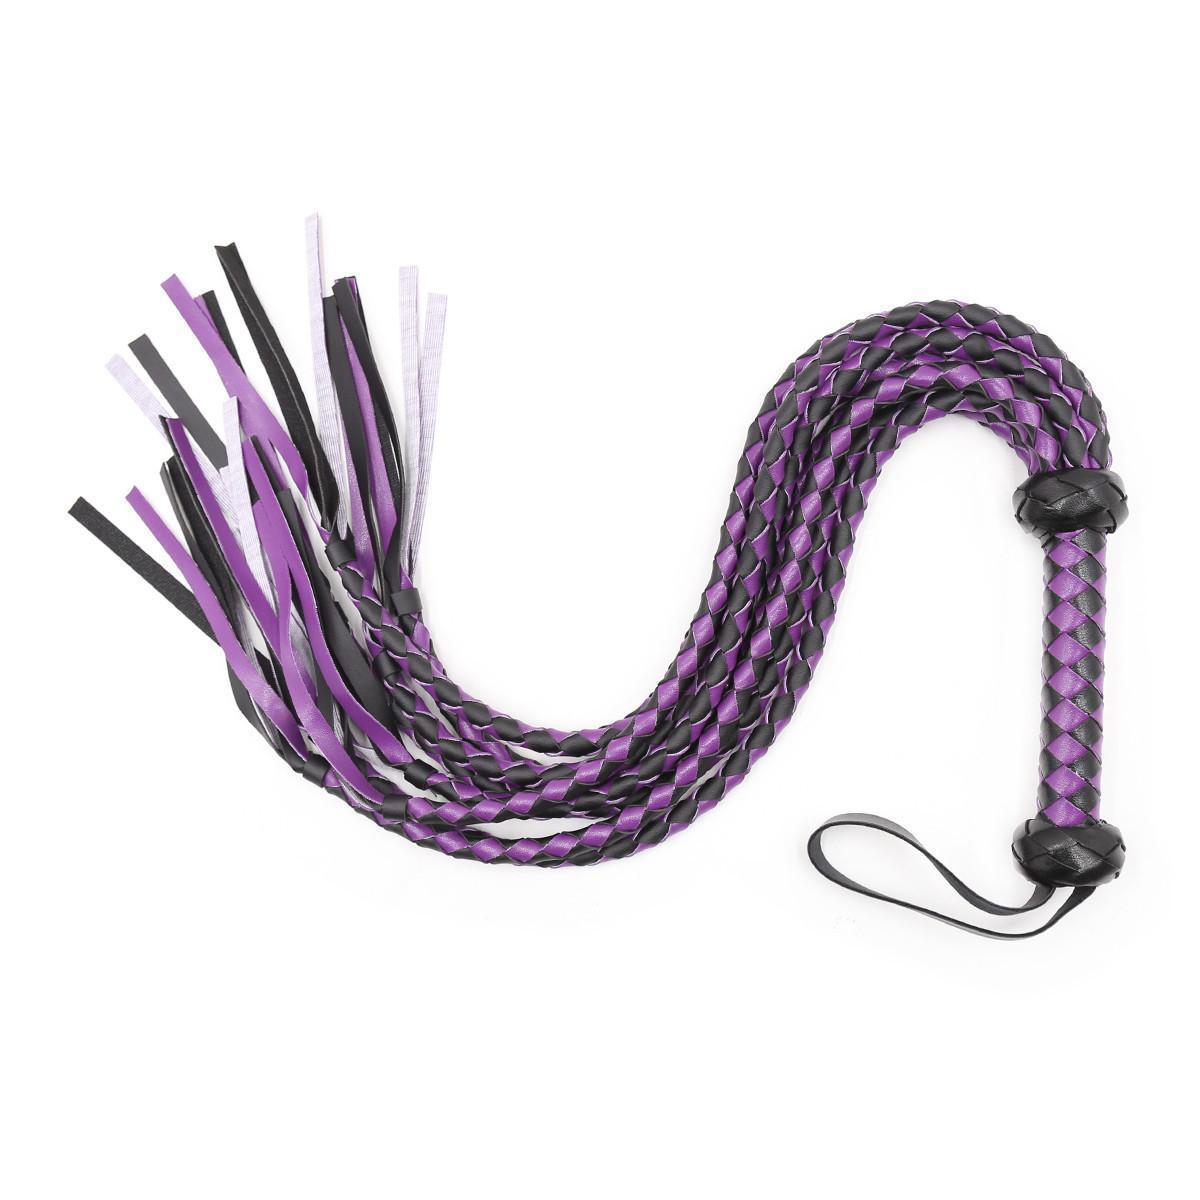 PU leather whip, SM toy, loose whip, adult toys